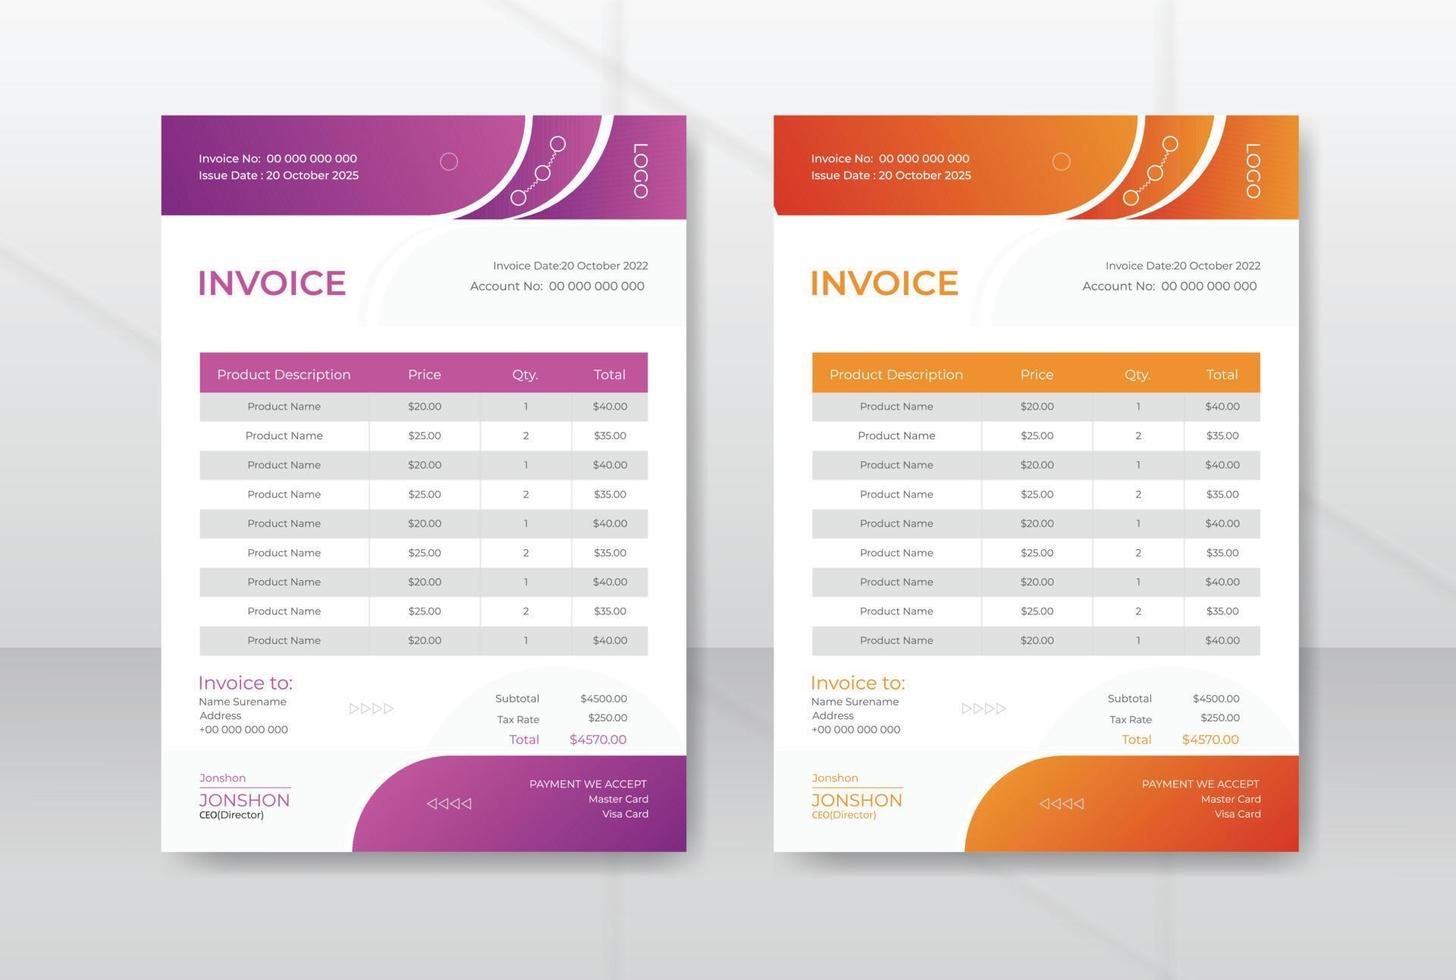 Invoice a4 design template. Minimal bill from business invoice accounting or document for payment vector